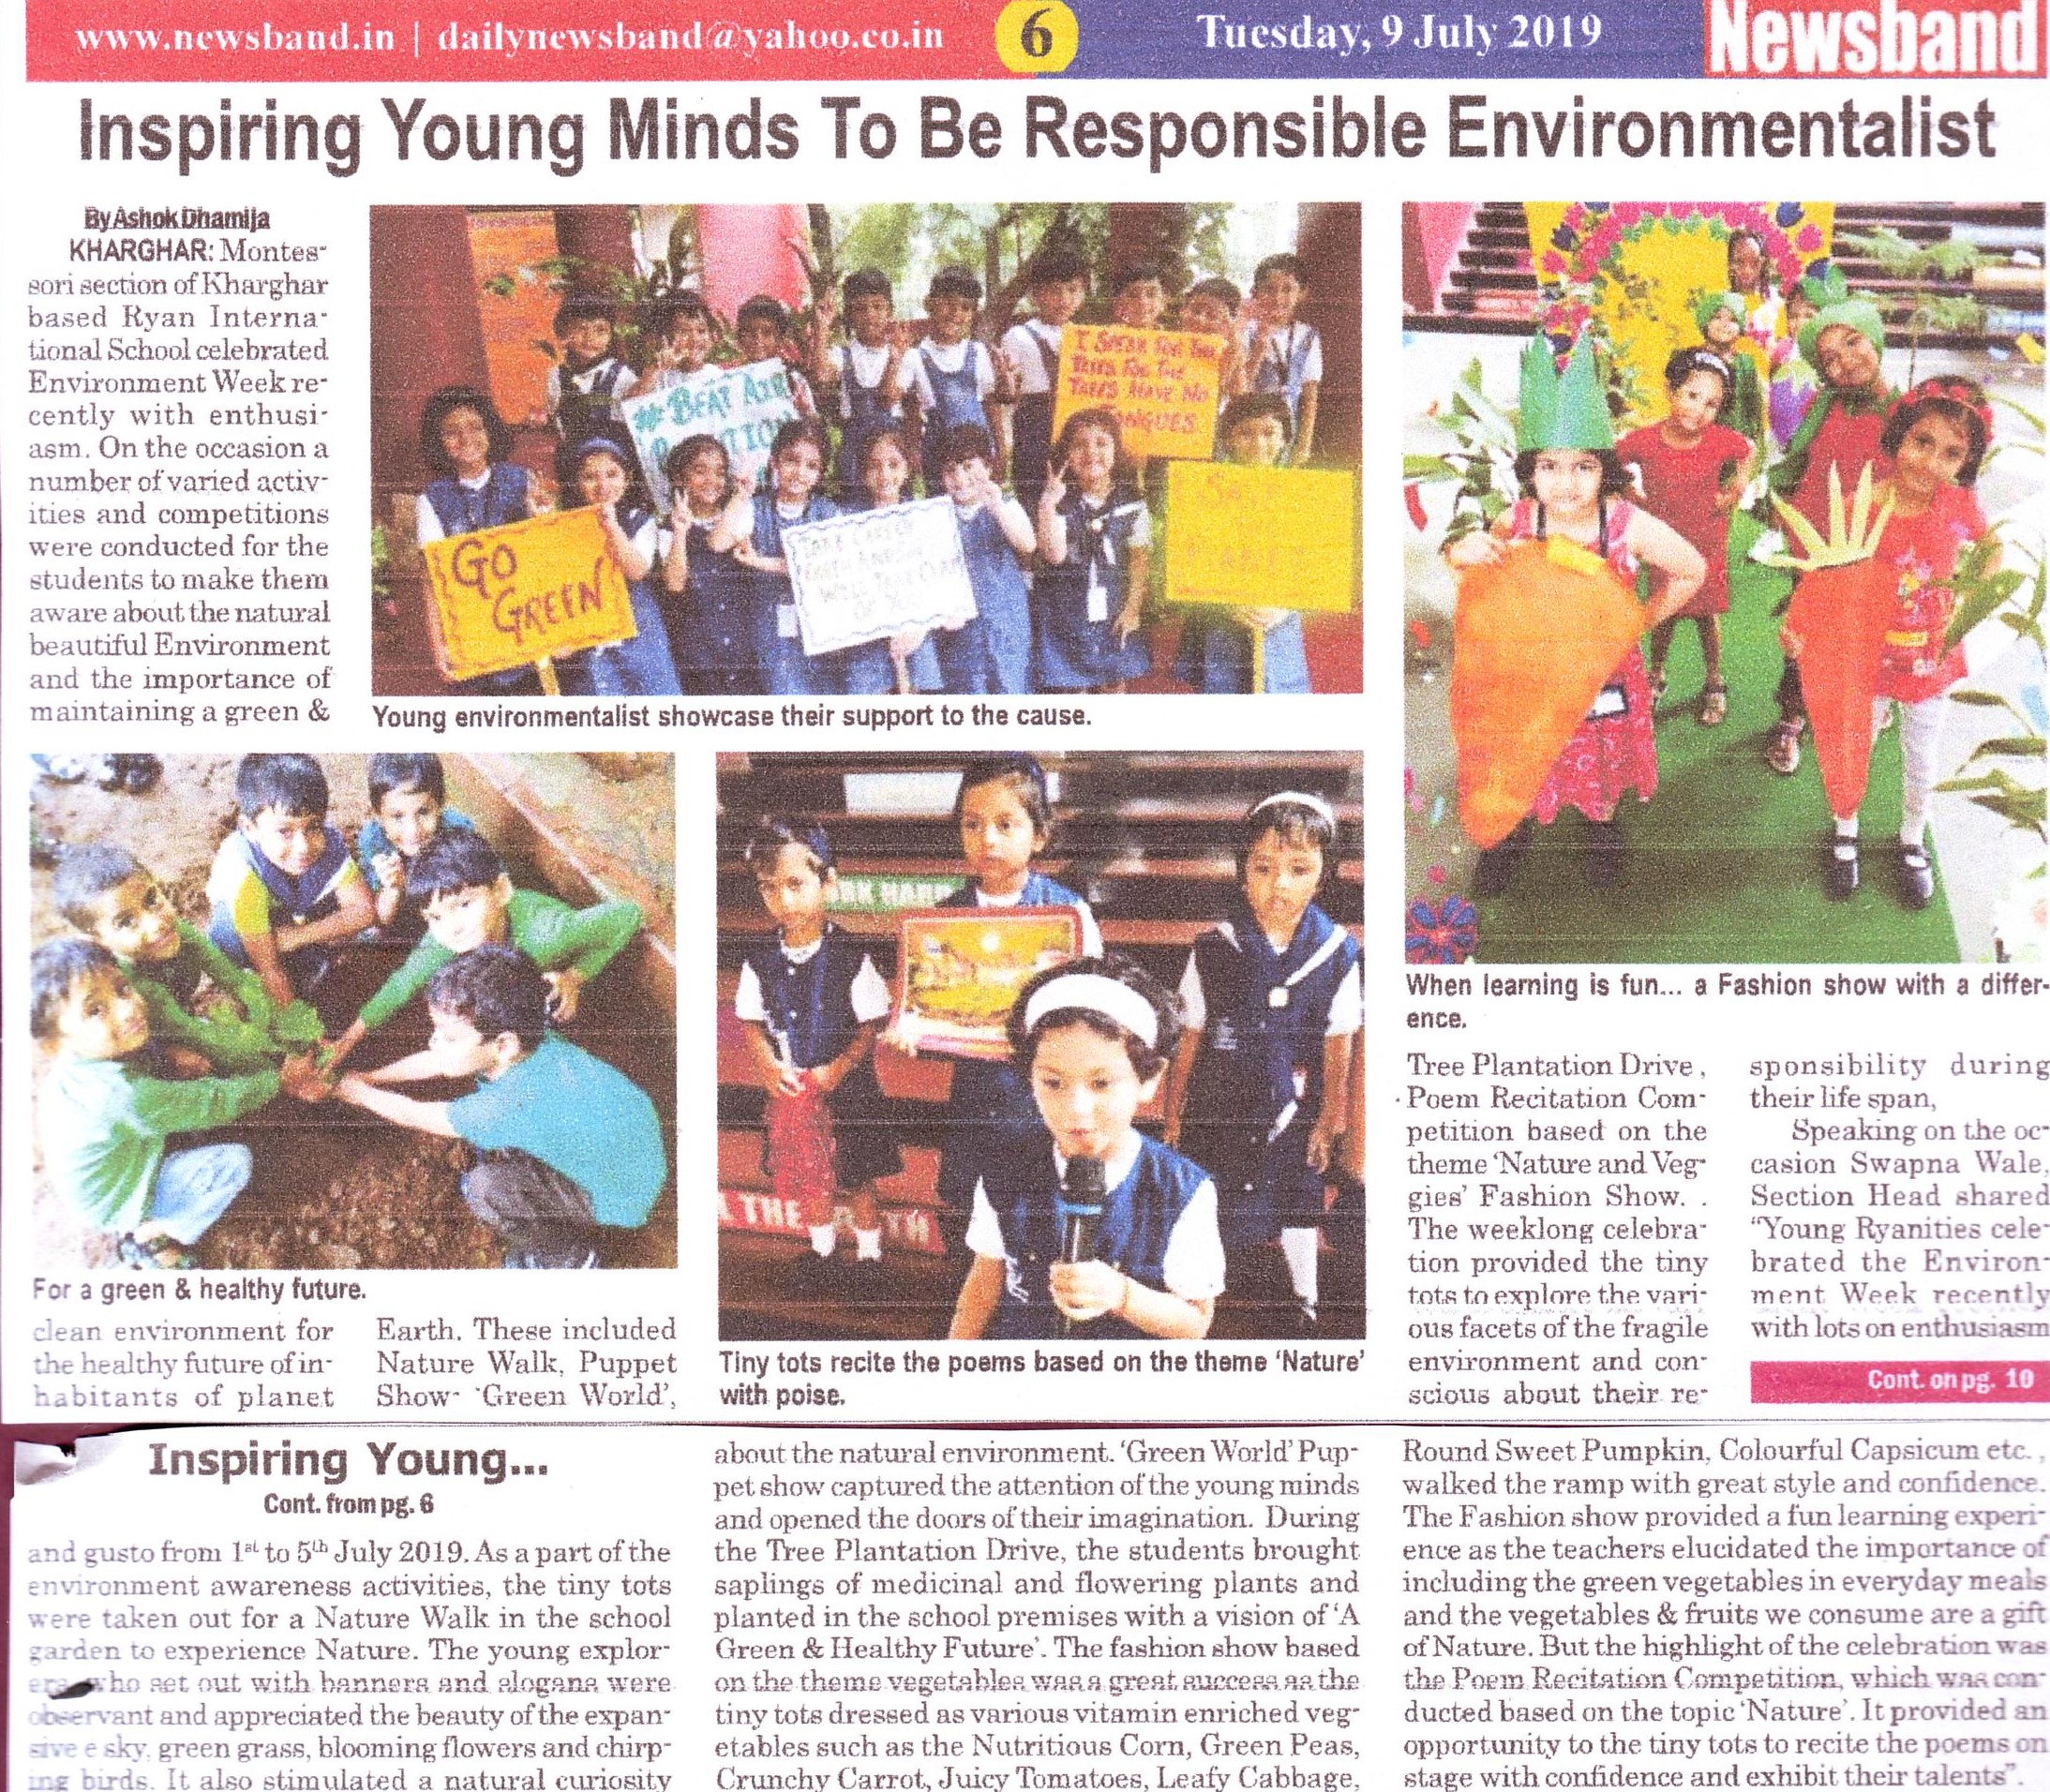 Inspiring Young Minds To Be Responsible Environmentalist was mentioned in Newsband - Ryan International School, Kharghar